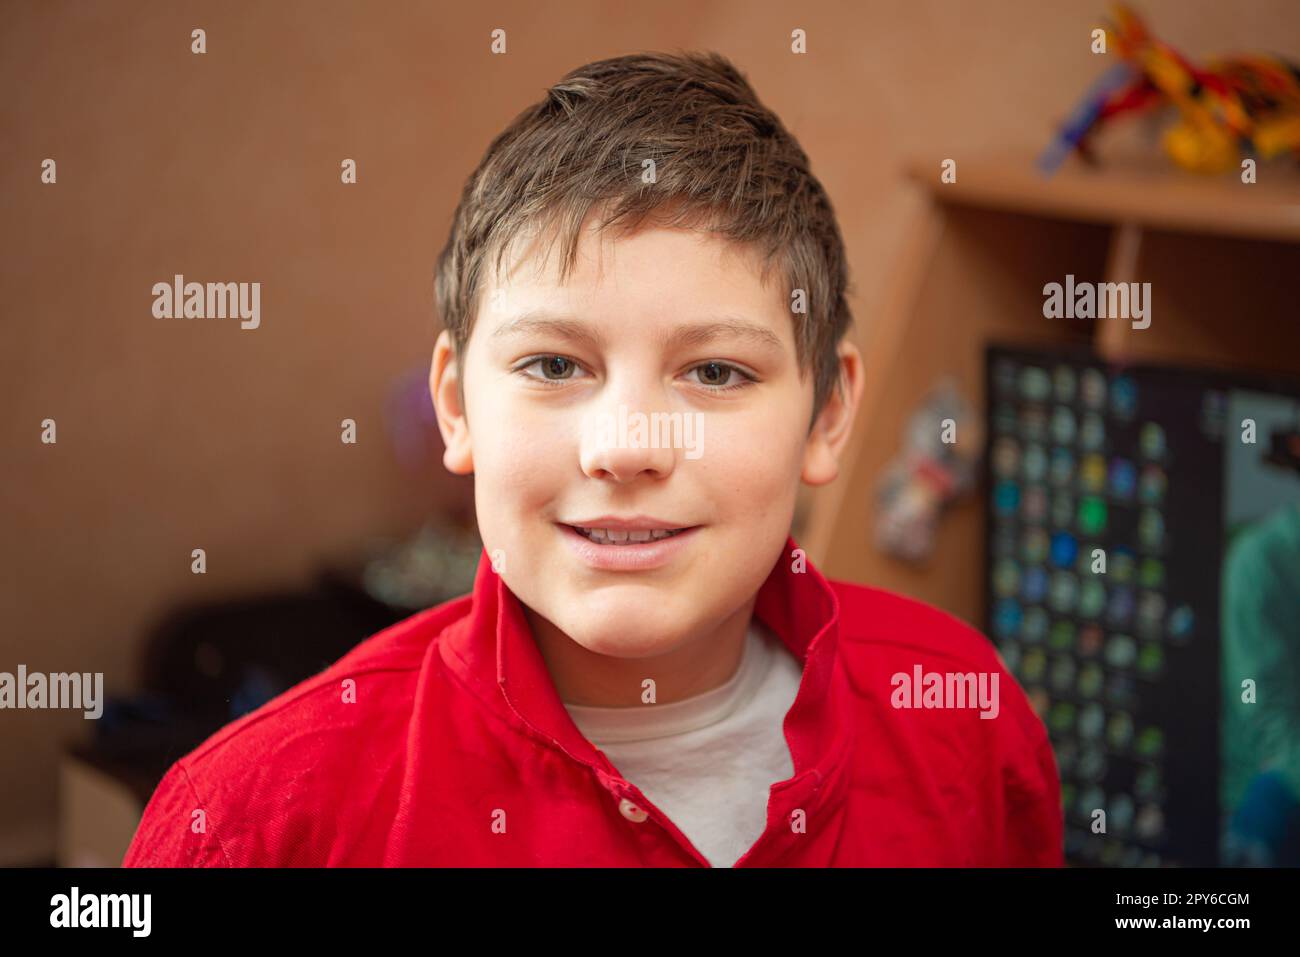 Close portrait of a smiling European teenage boy in a red shirt in his room Stock Photo